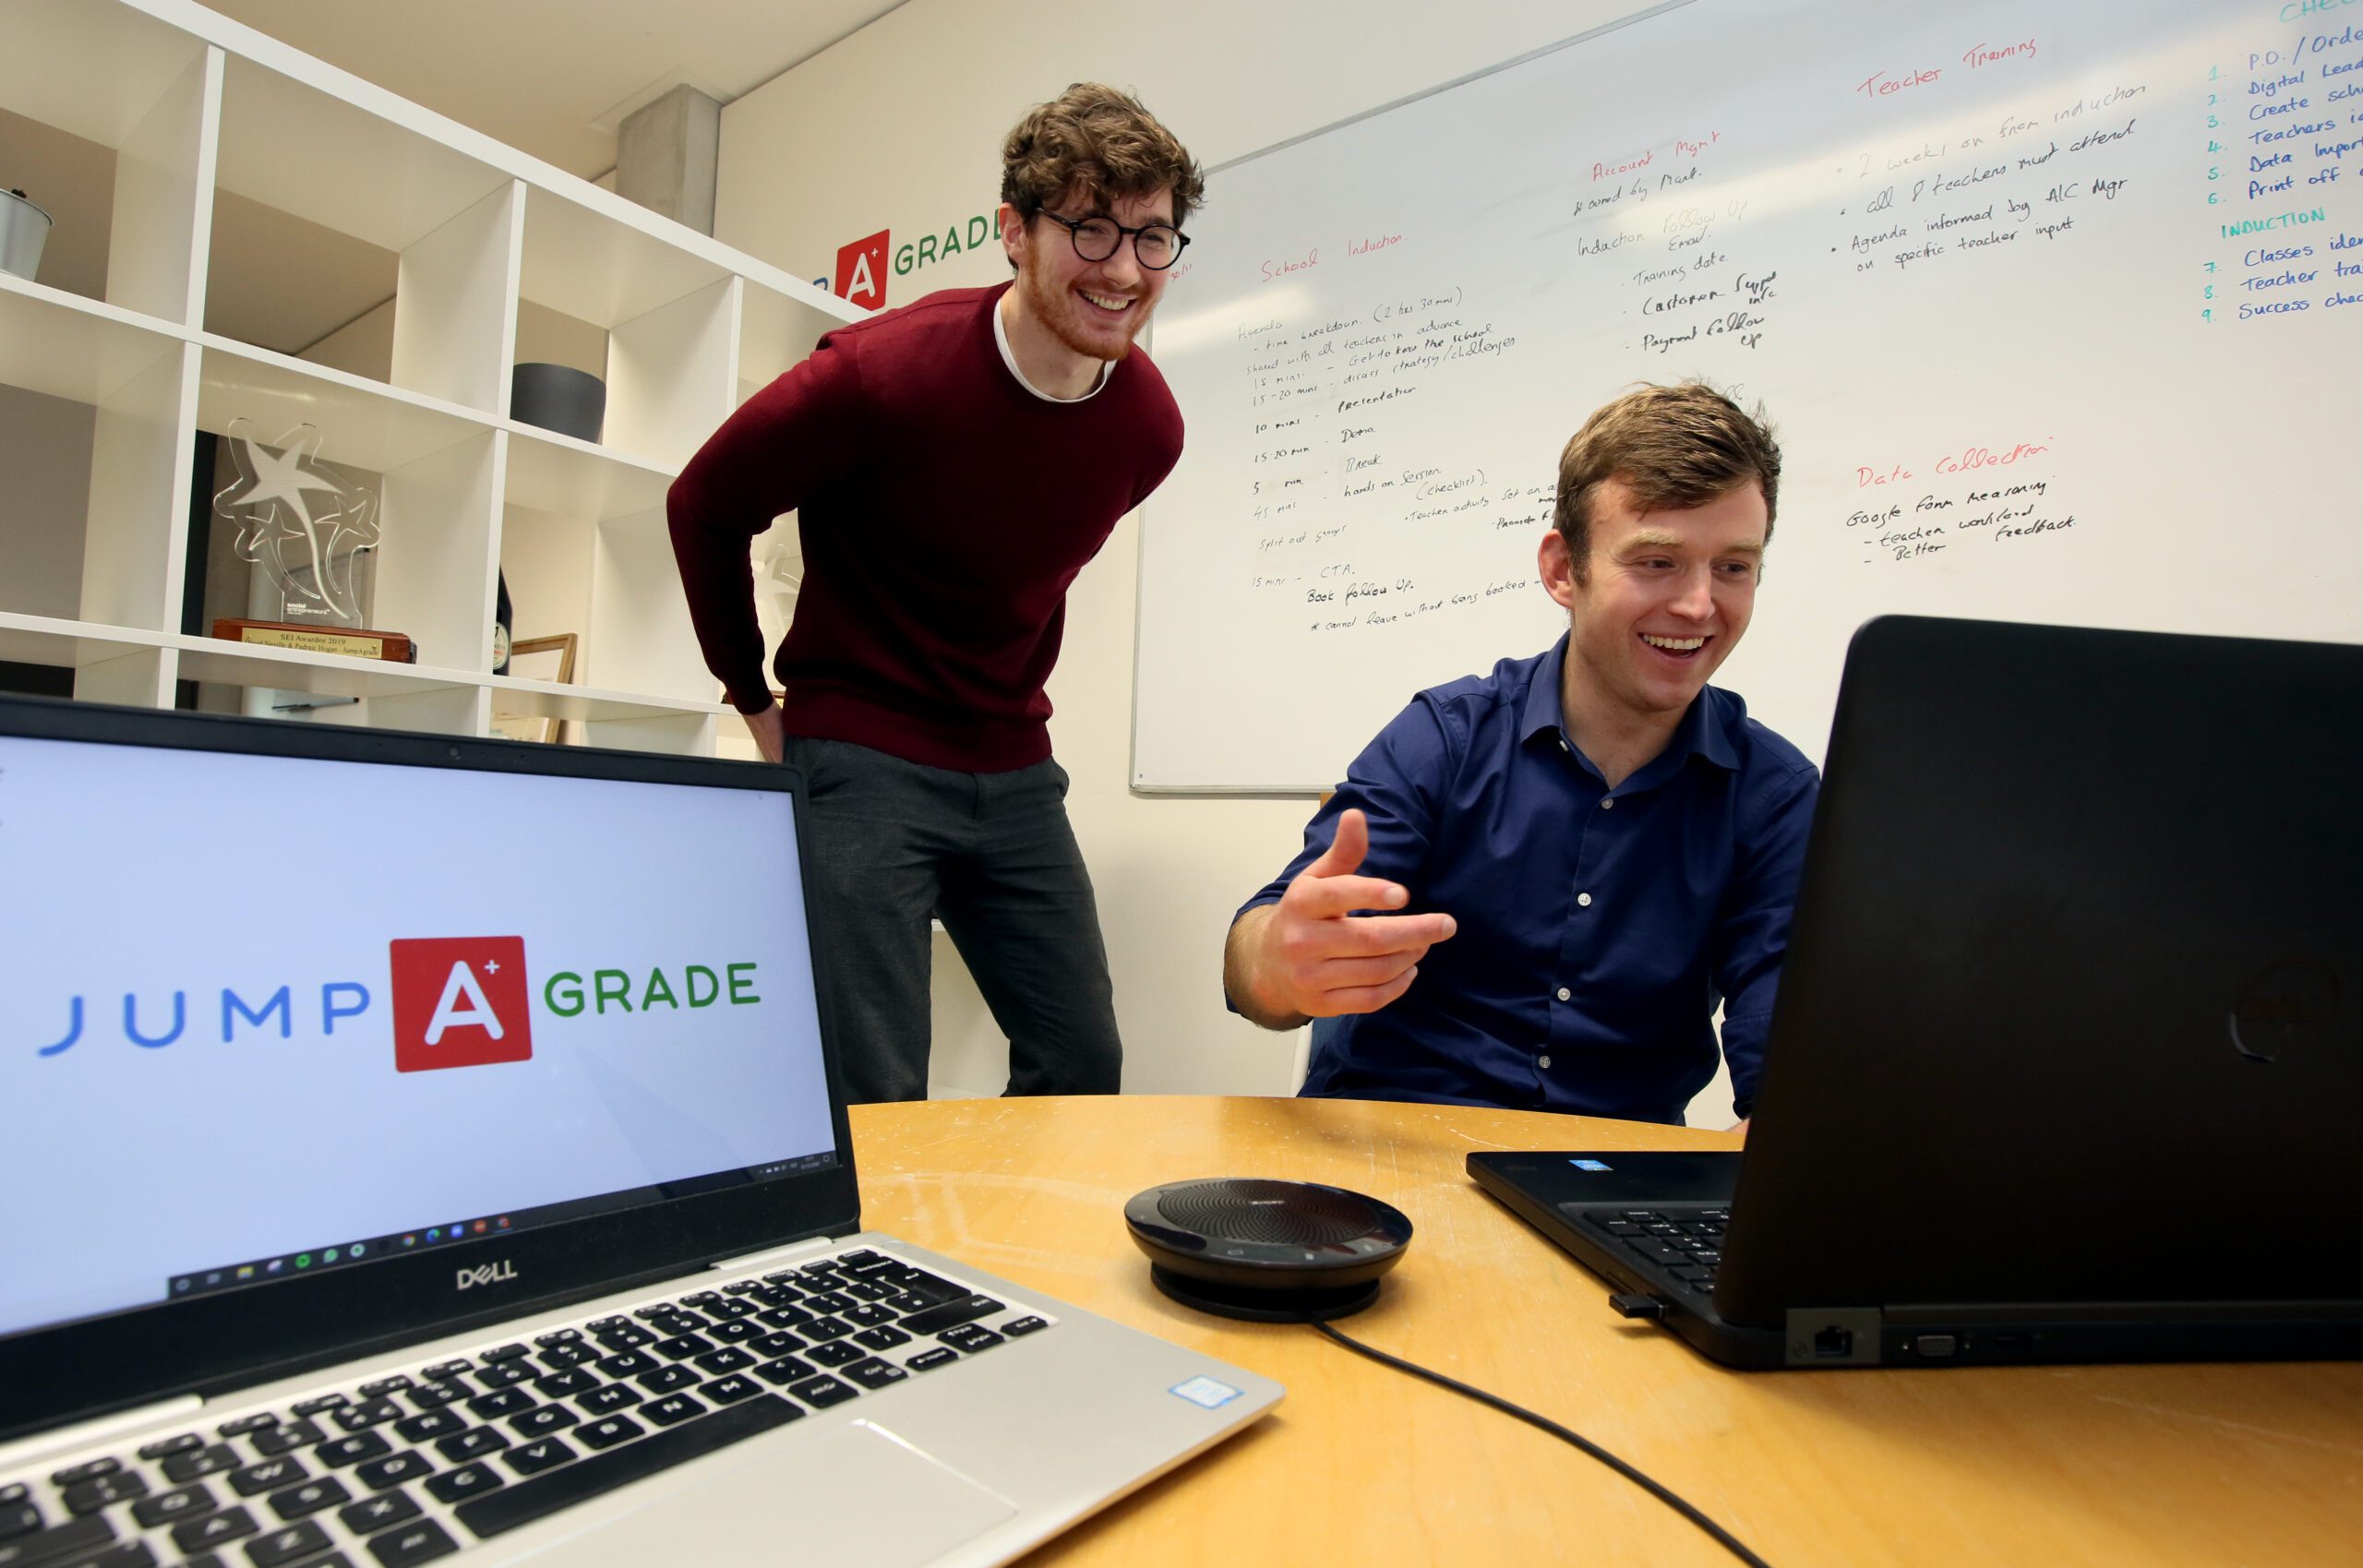 Ep. 10: Making education accessible to everyone – David Neville & Pádraic Hogan, co-founders of JumpAgrade